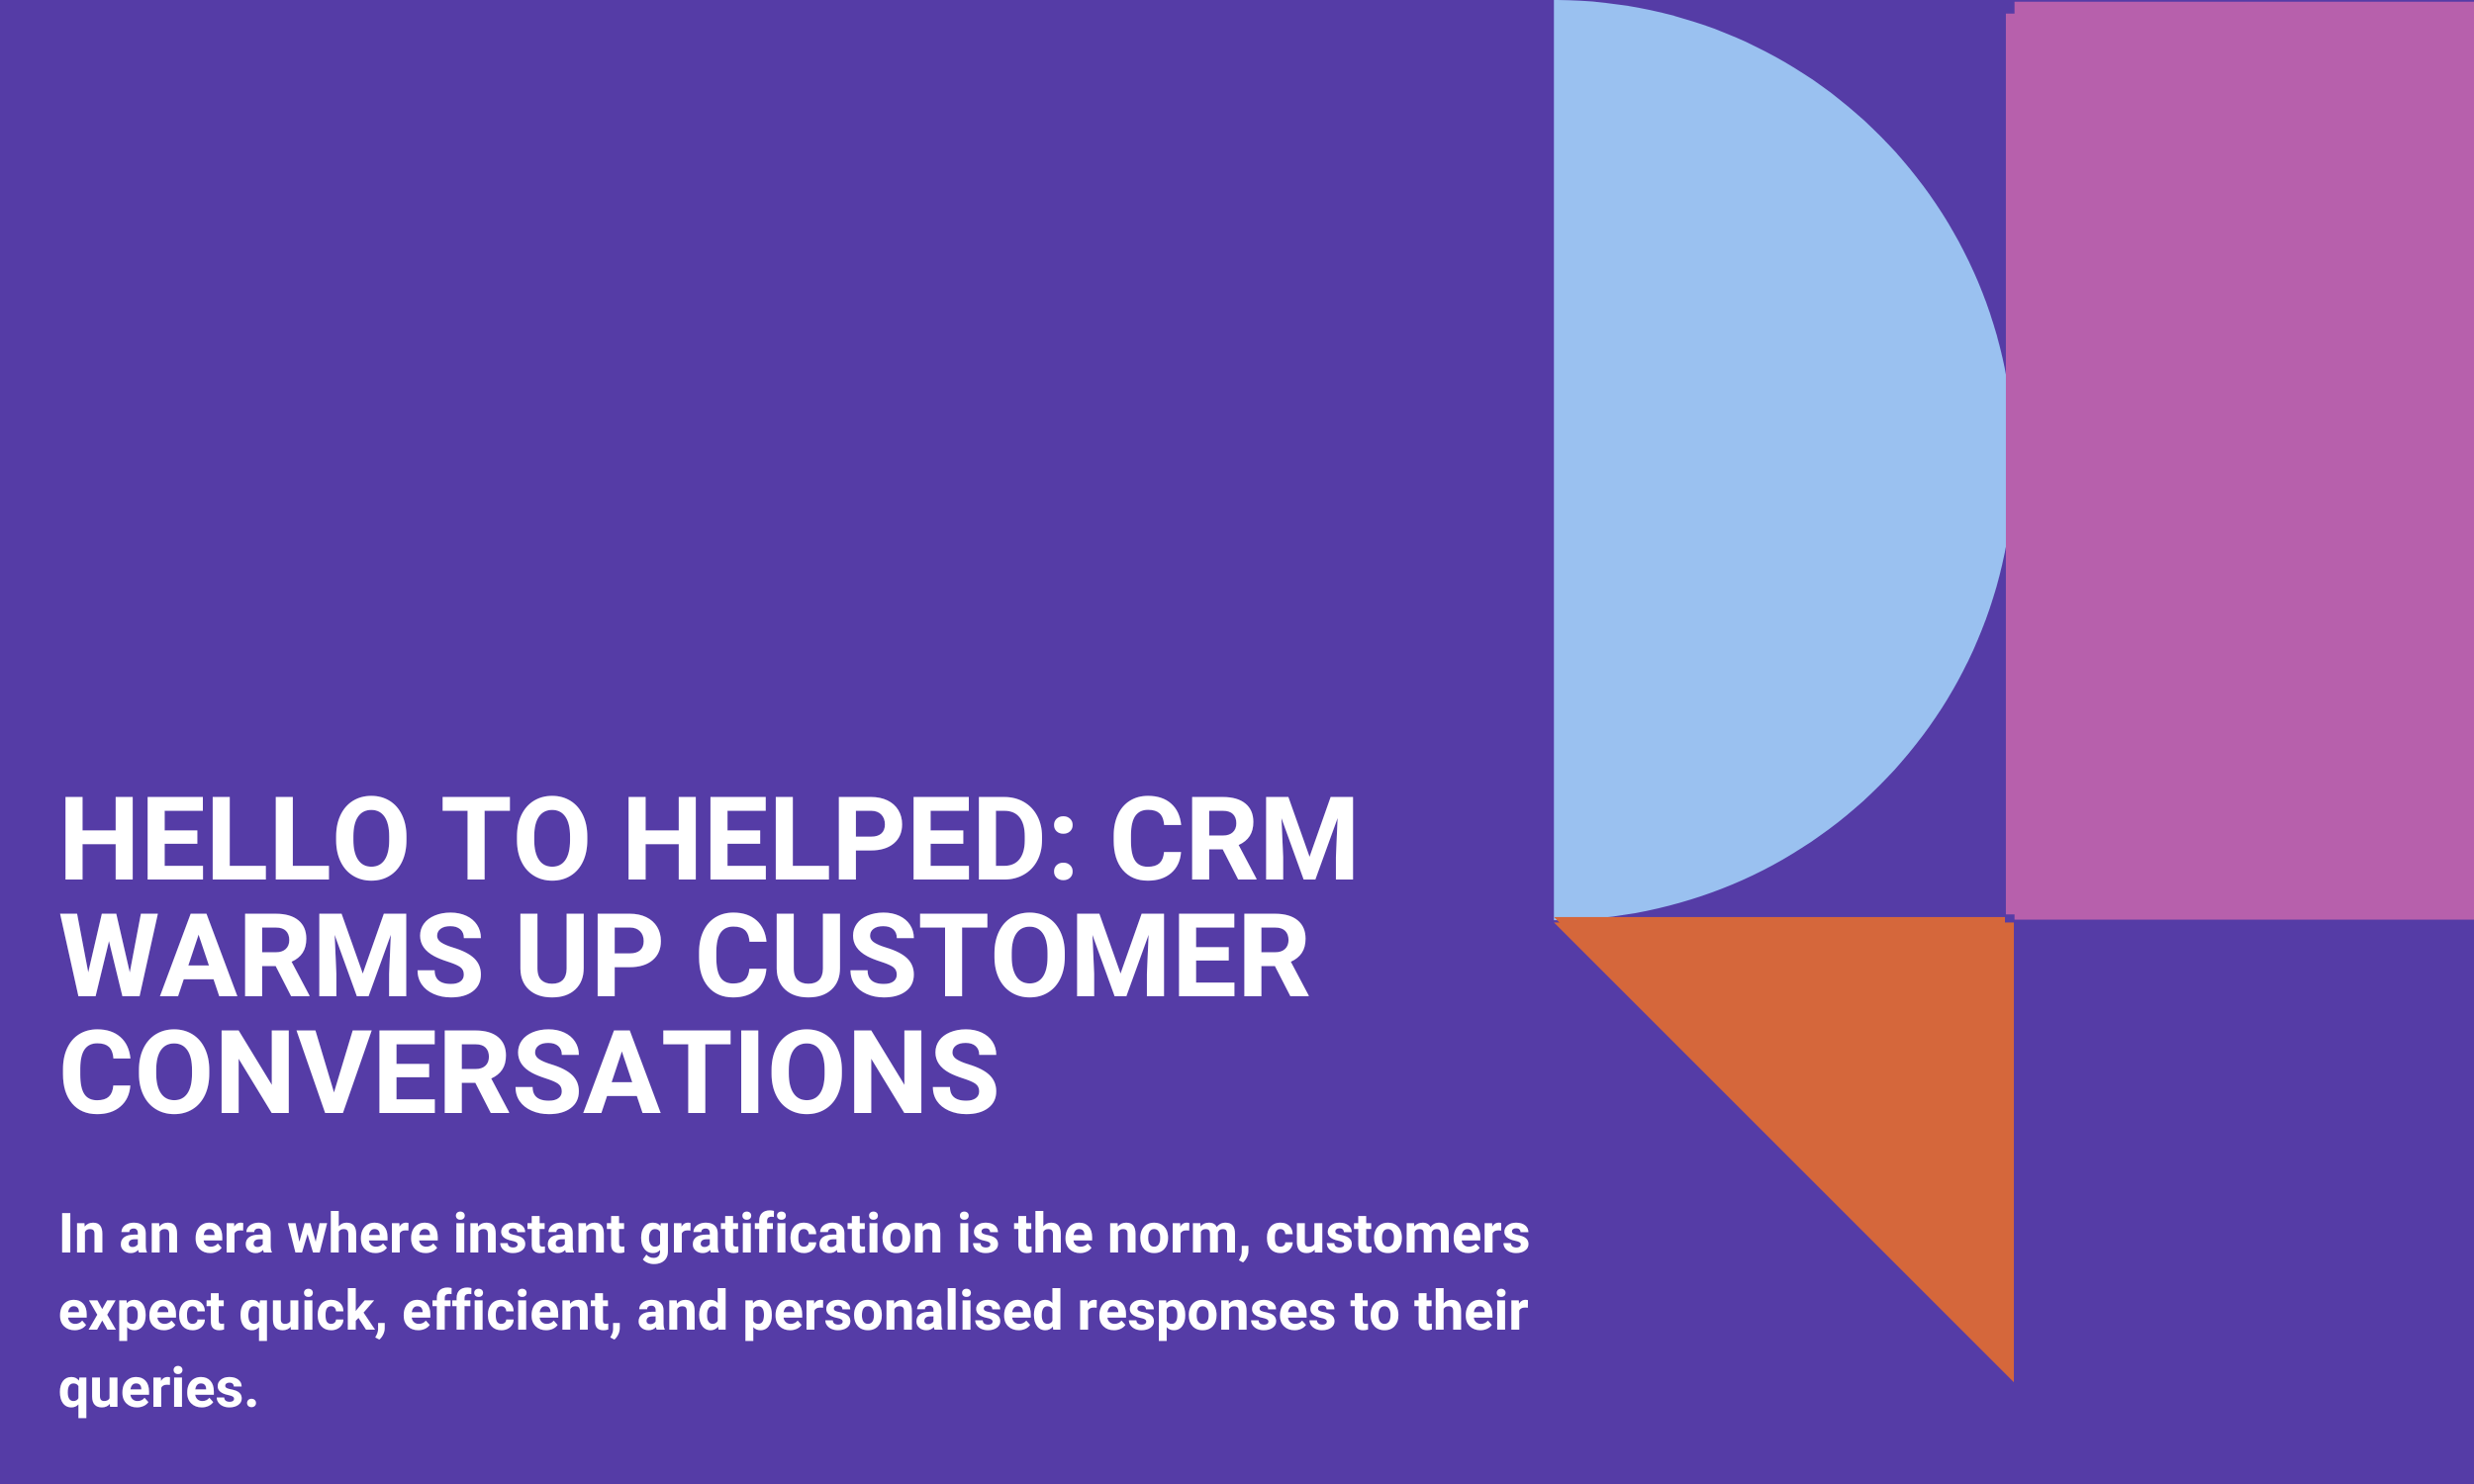 Hello to Helped: CRM Warms Up Customer Conversations